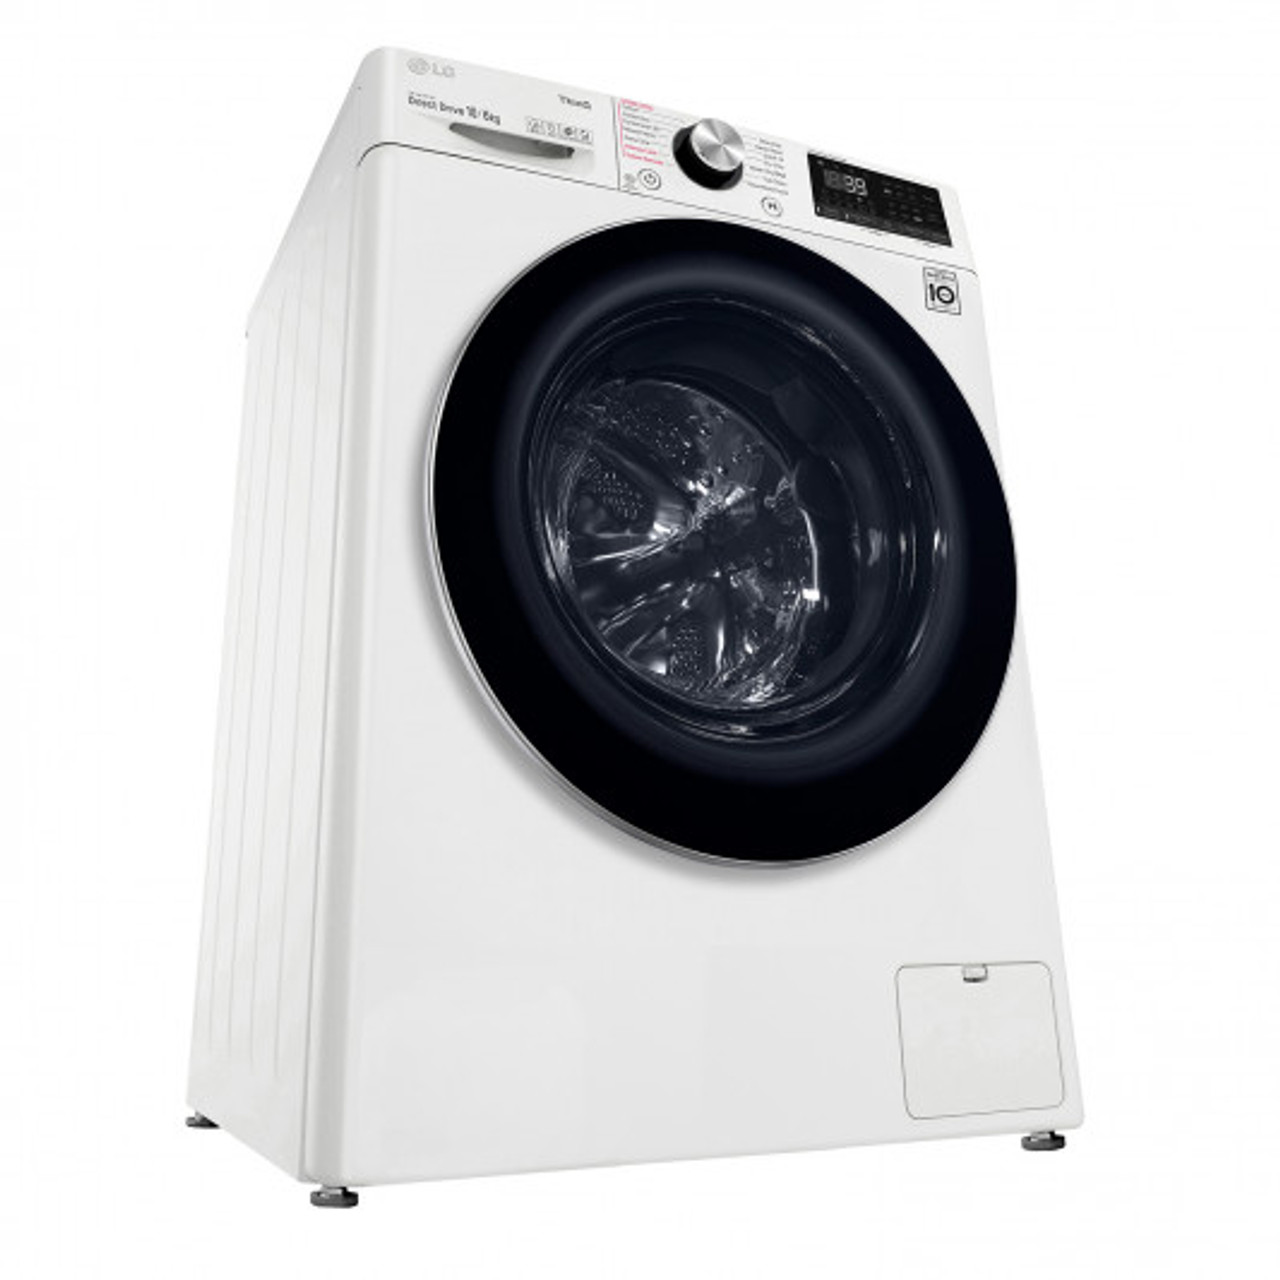 WVC9-1410W - 10kg / 6kg  Washer Dryer Combo with Steam